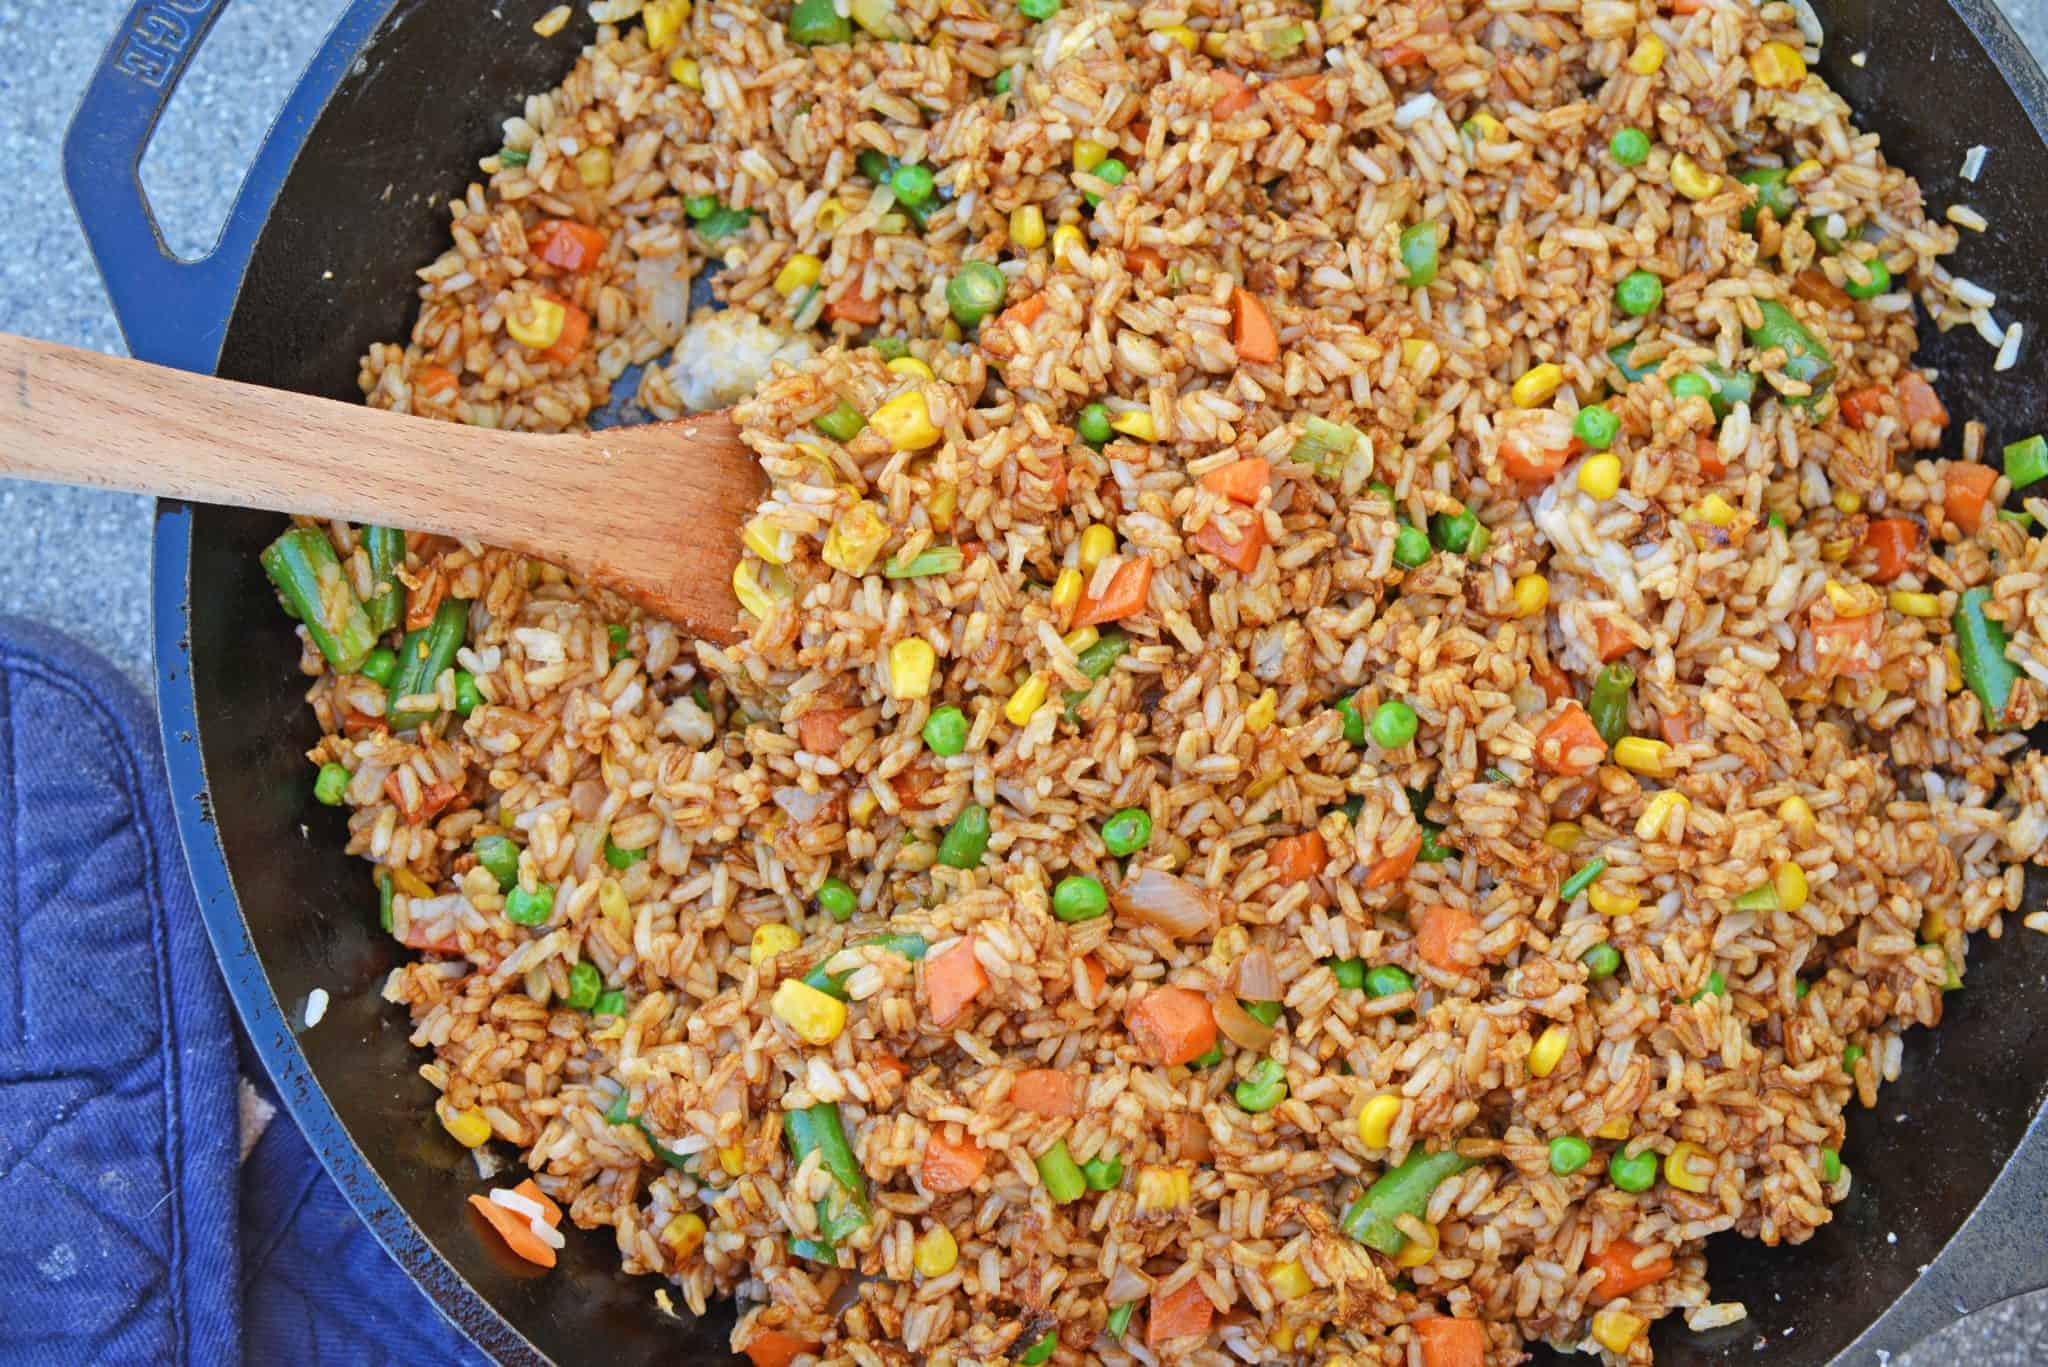 Easy Fried Rice is the best restaurant style fried rice you'll ever make! Just 15 minutes and a great way to clean out the vegetable drawer.